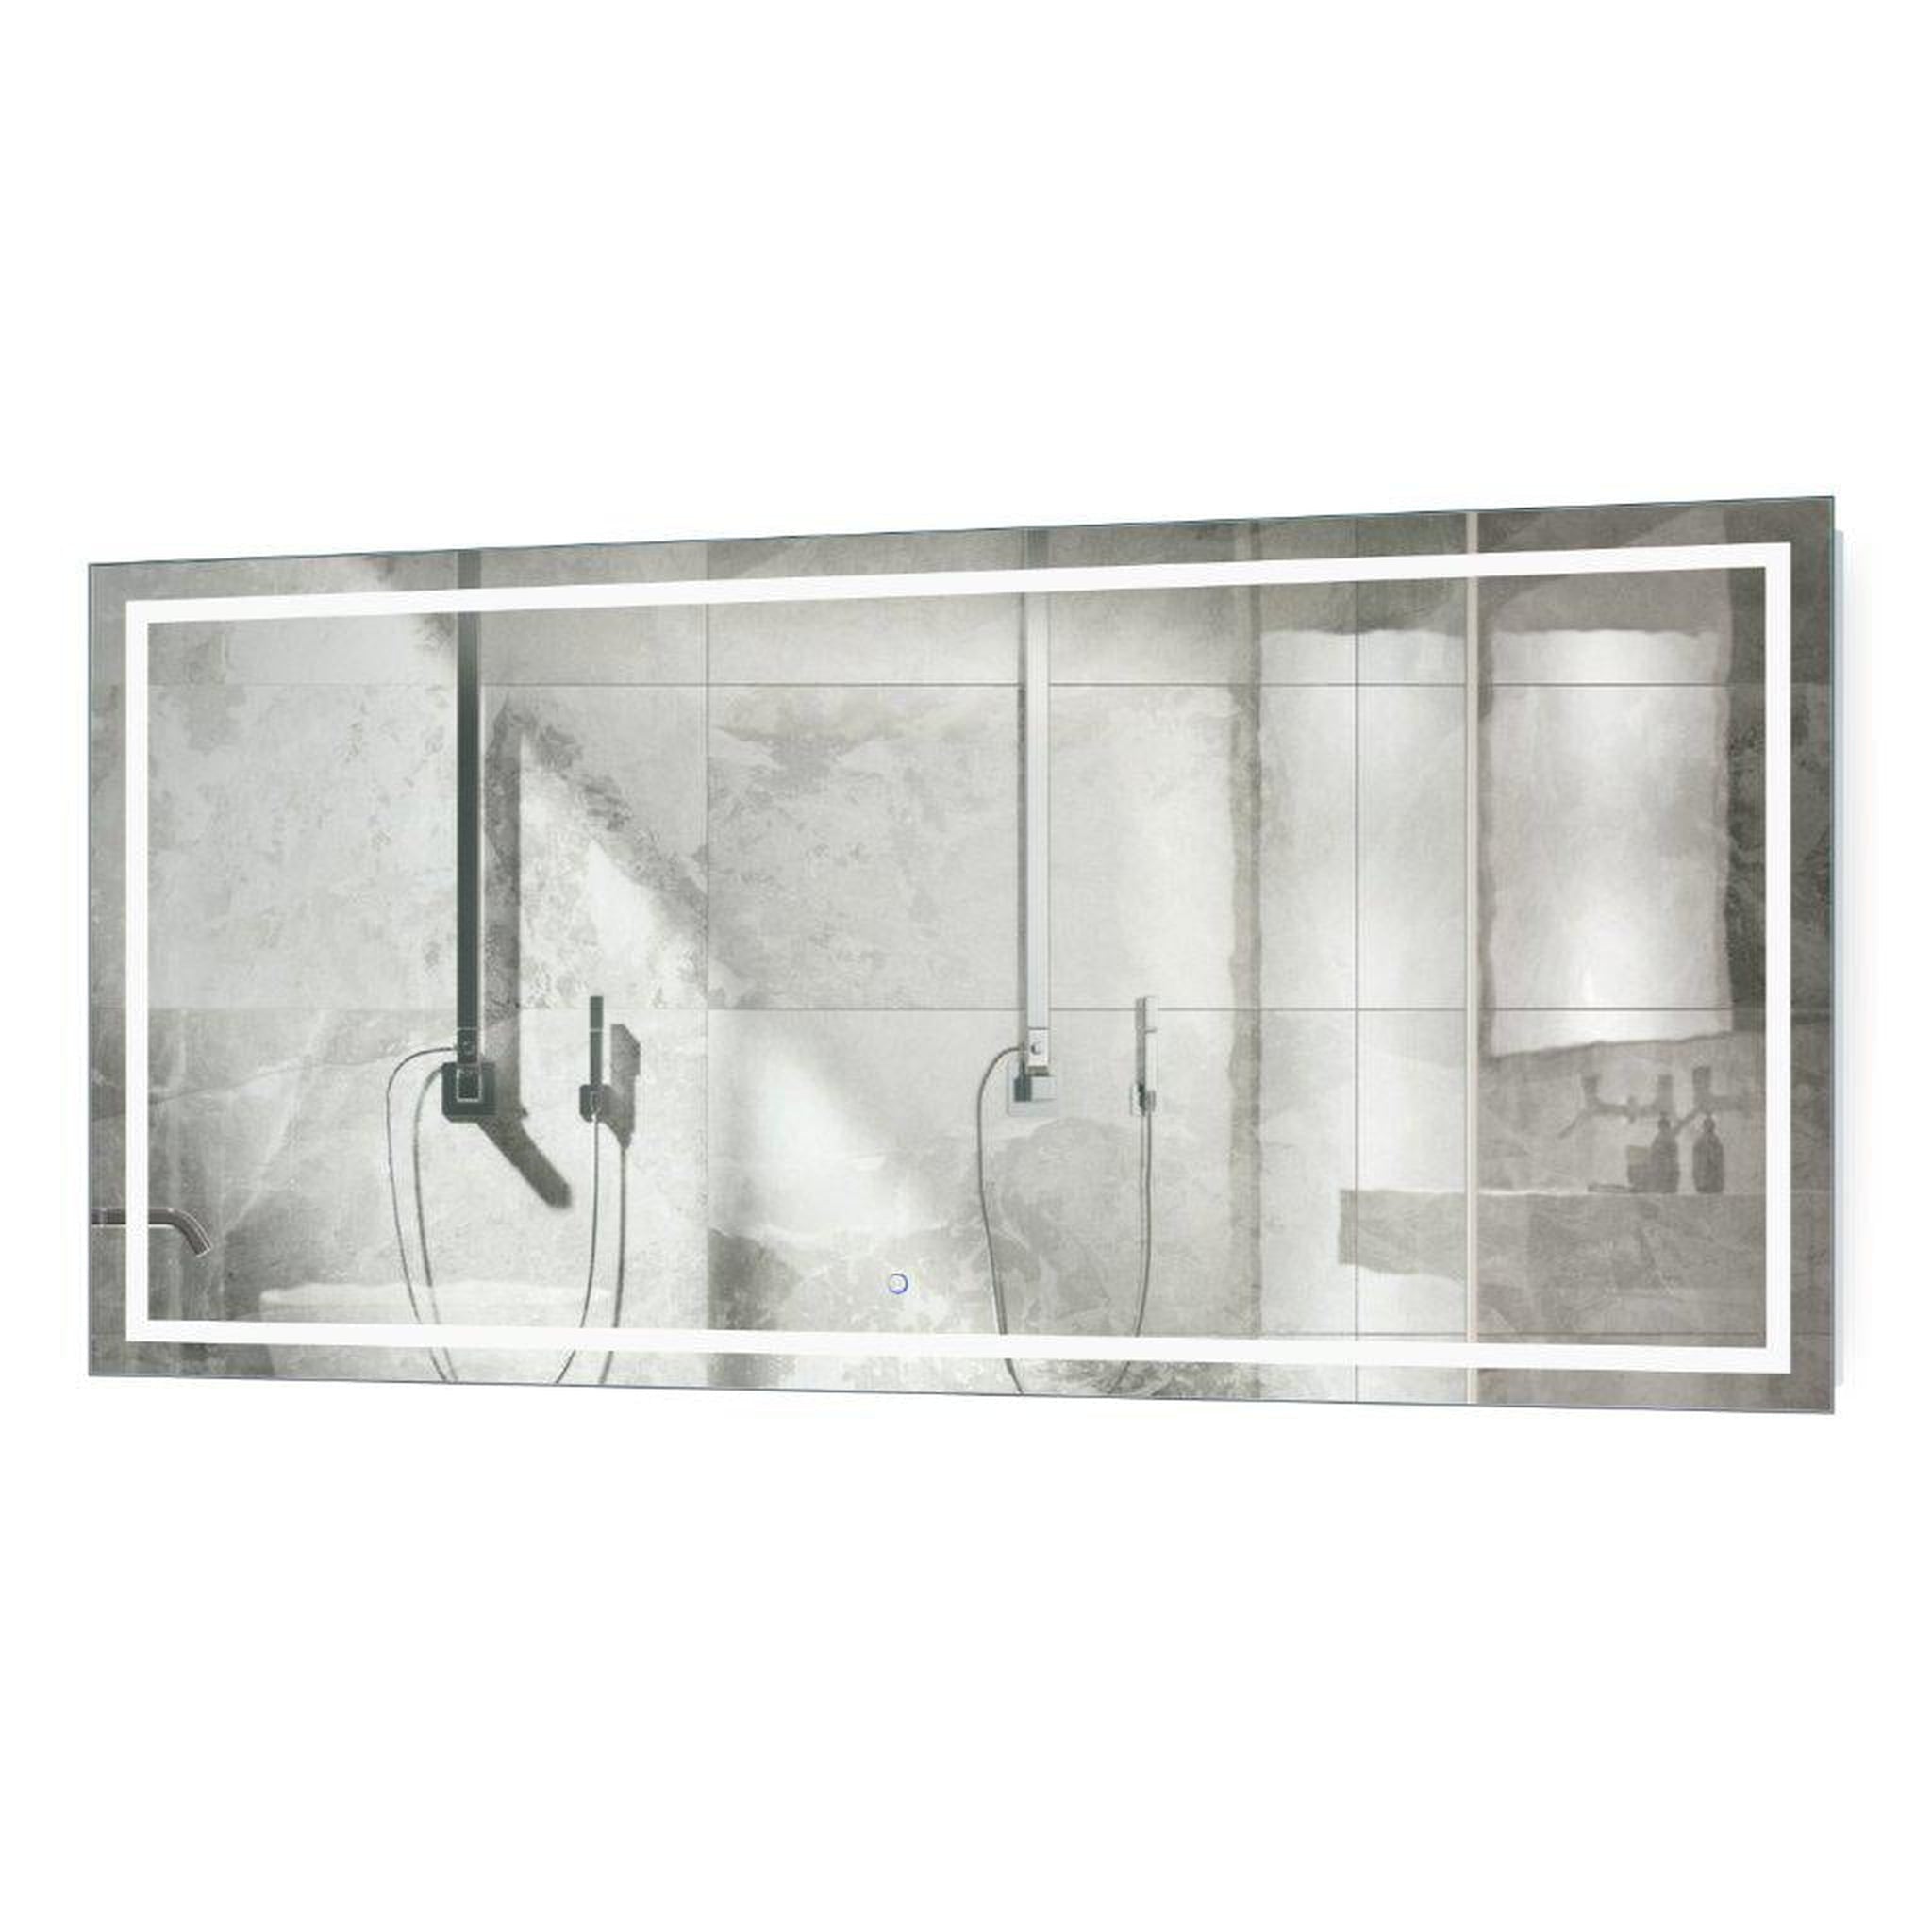 Krugg Reflections, Krugg Reflections Icon 72” x 36” 5000K Rectangular Wall-Mounted Illuminated Silver Backed LED  Mirror With Built-in Defogger and Touch Sensor On/Off Built-in Dimmer